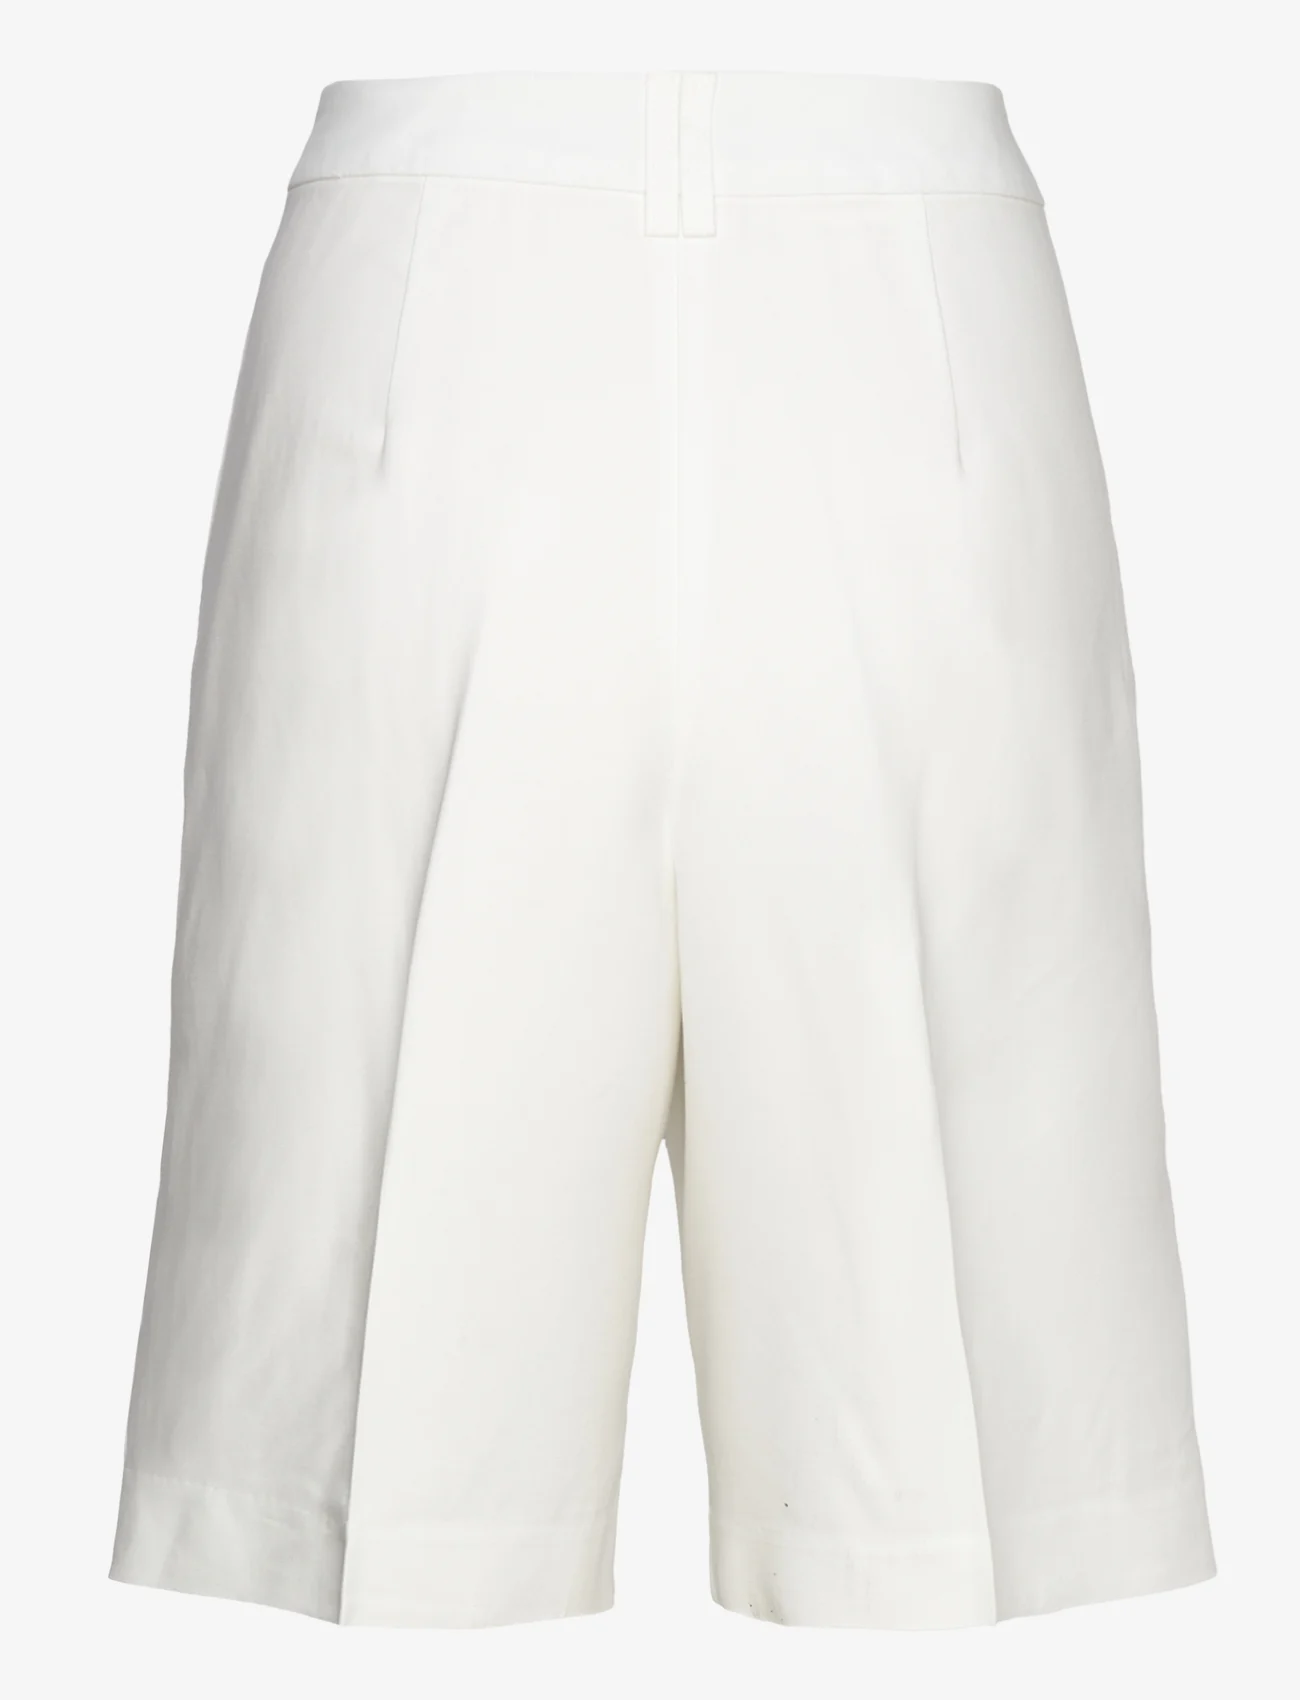 GANT - RELAXED PLEATED SHORTS - white - 1